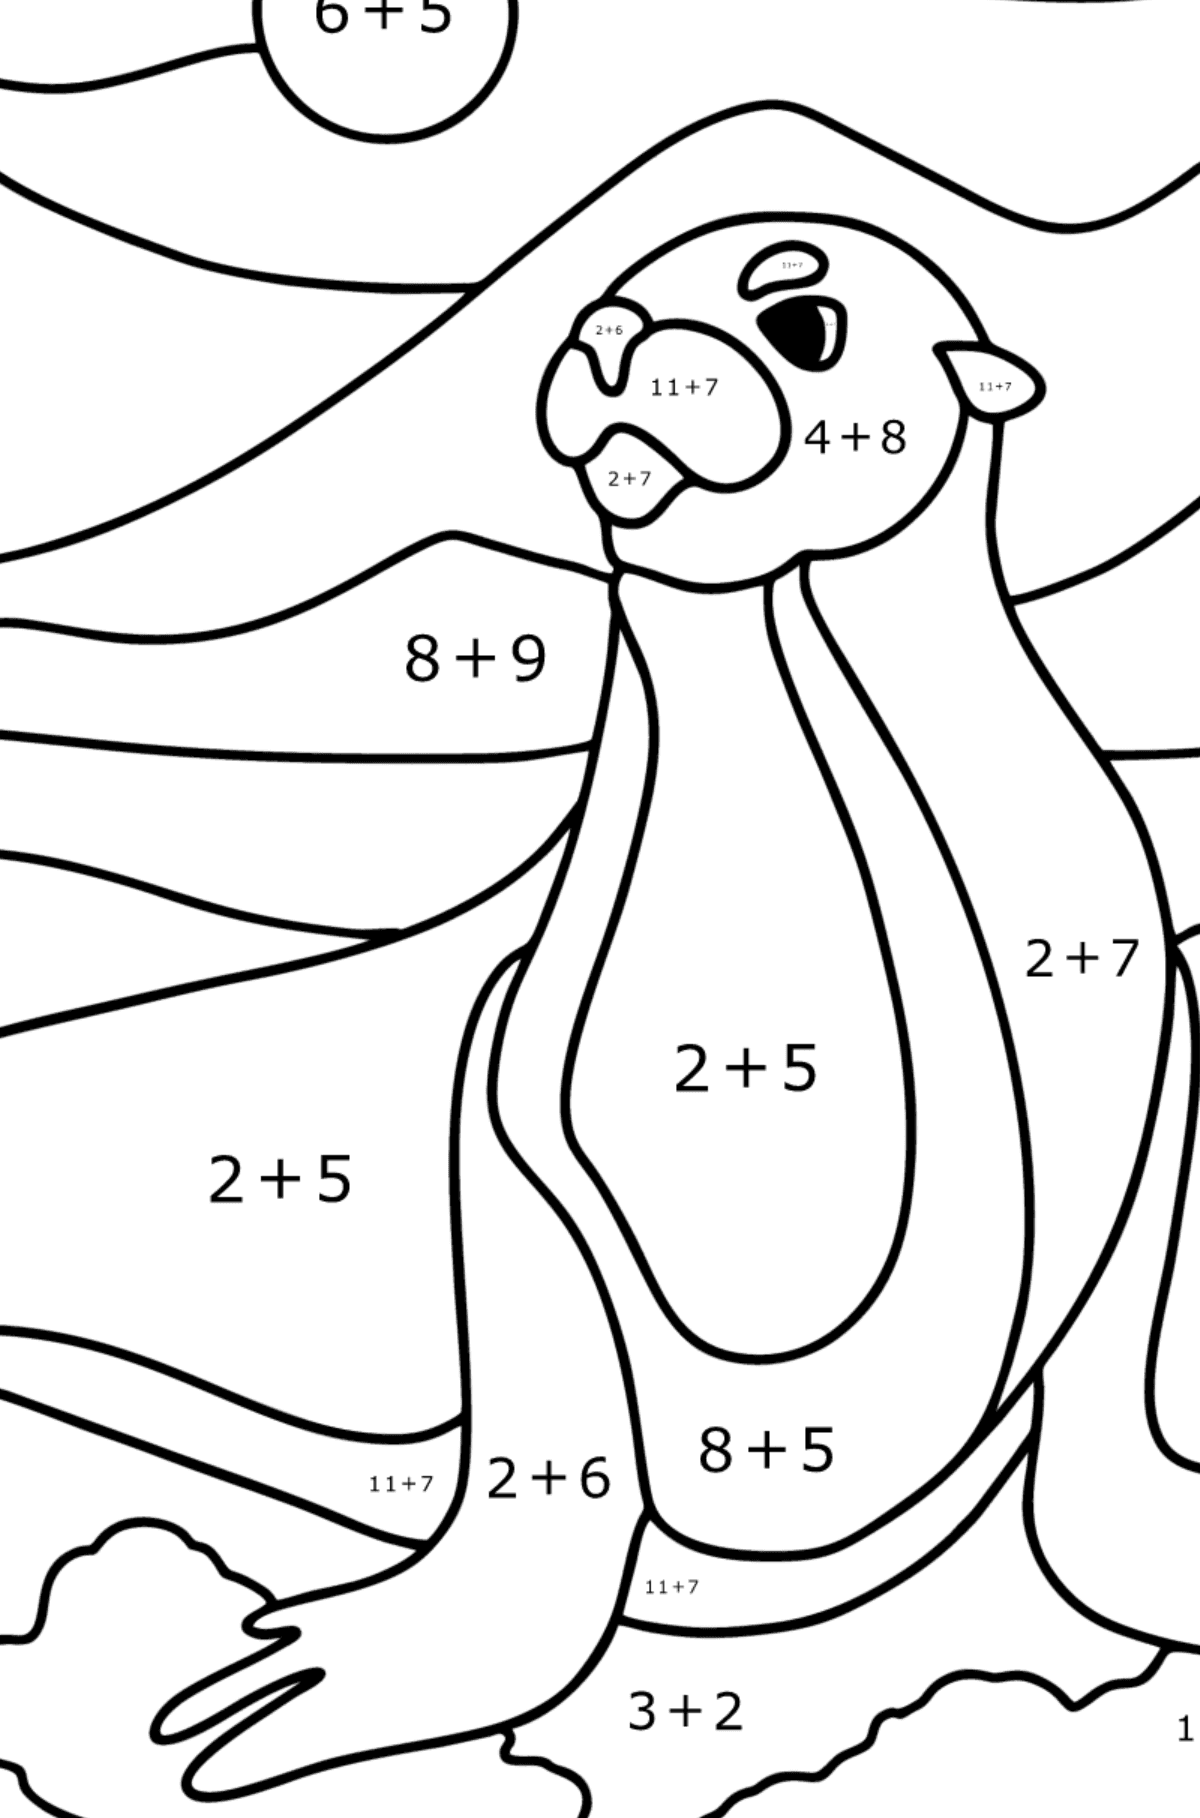 Sea lion coloring page - Math Coloring - Addition for Kids